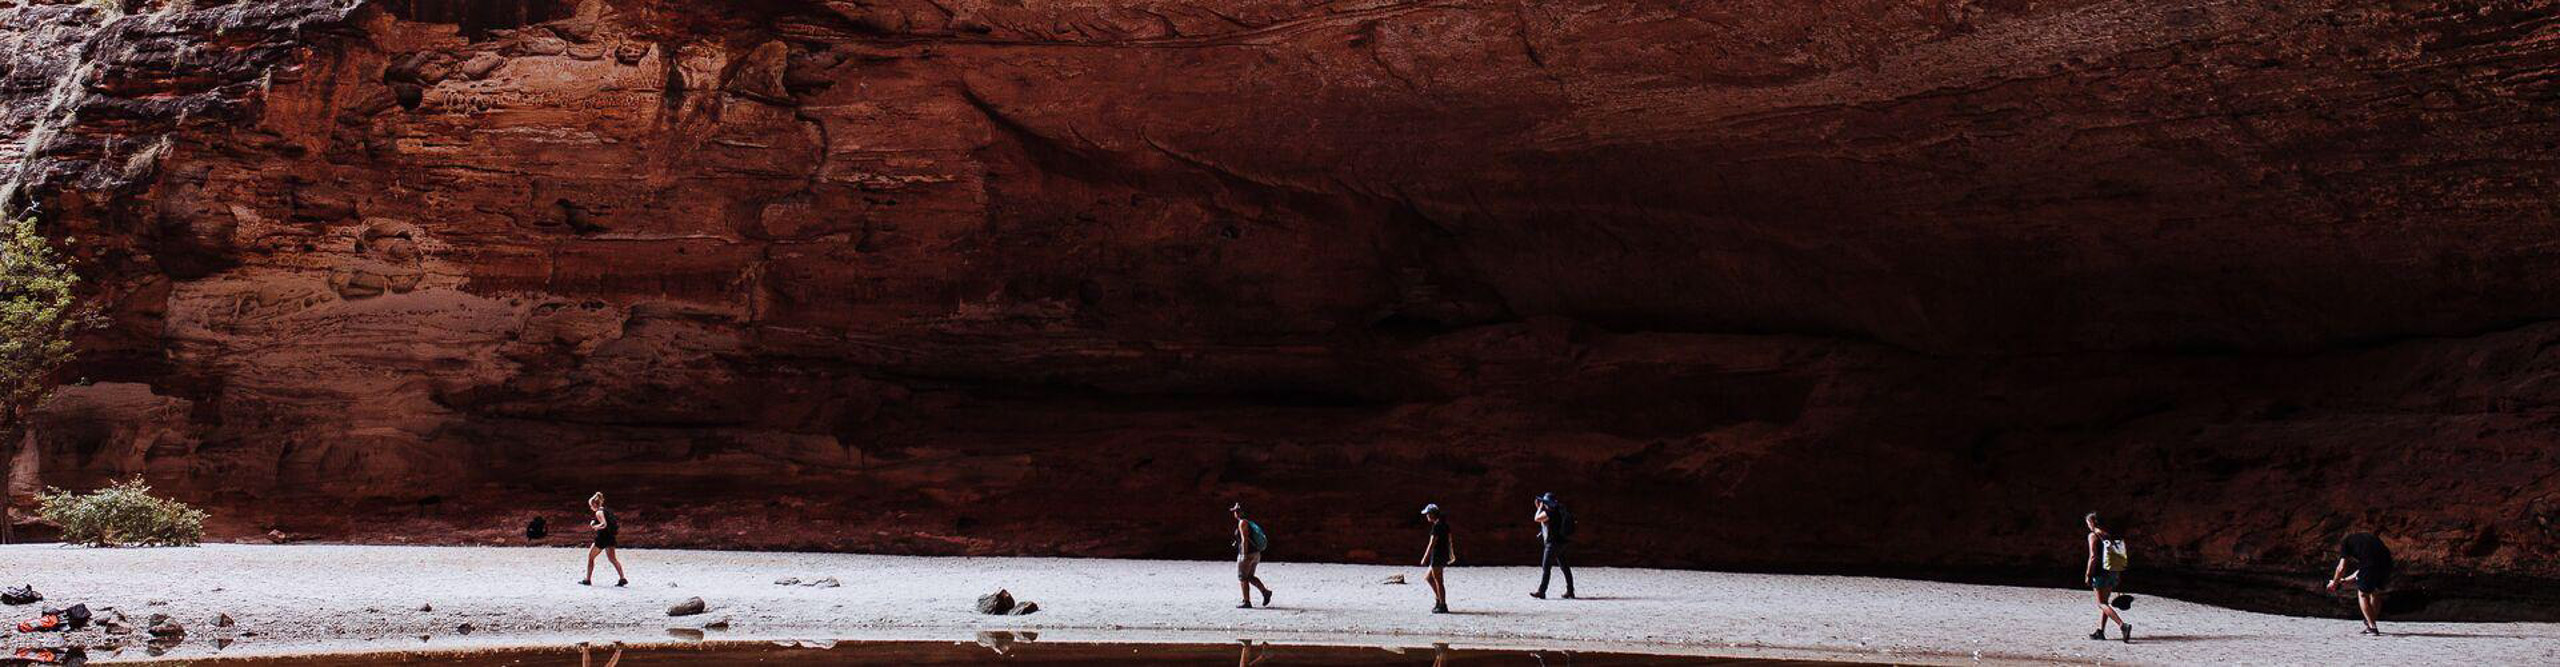 Group walking through a cavern in the Kimberley's, Western Australia 